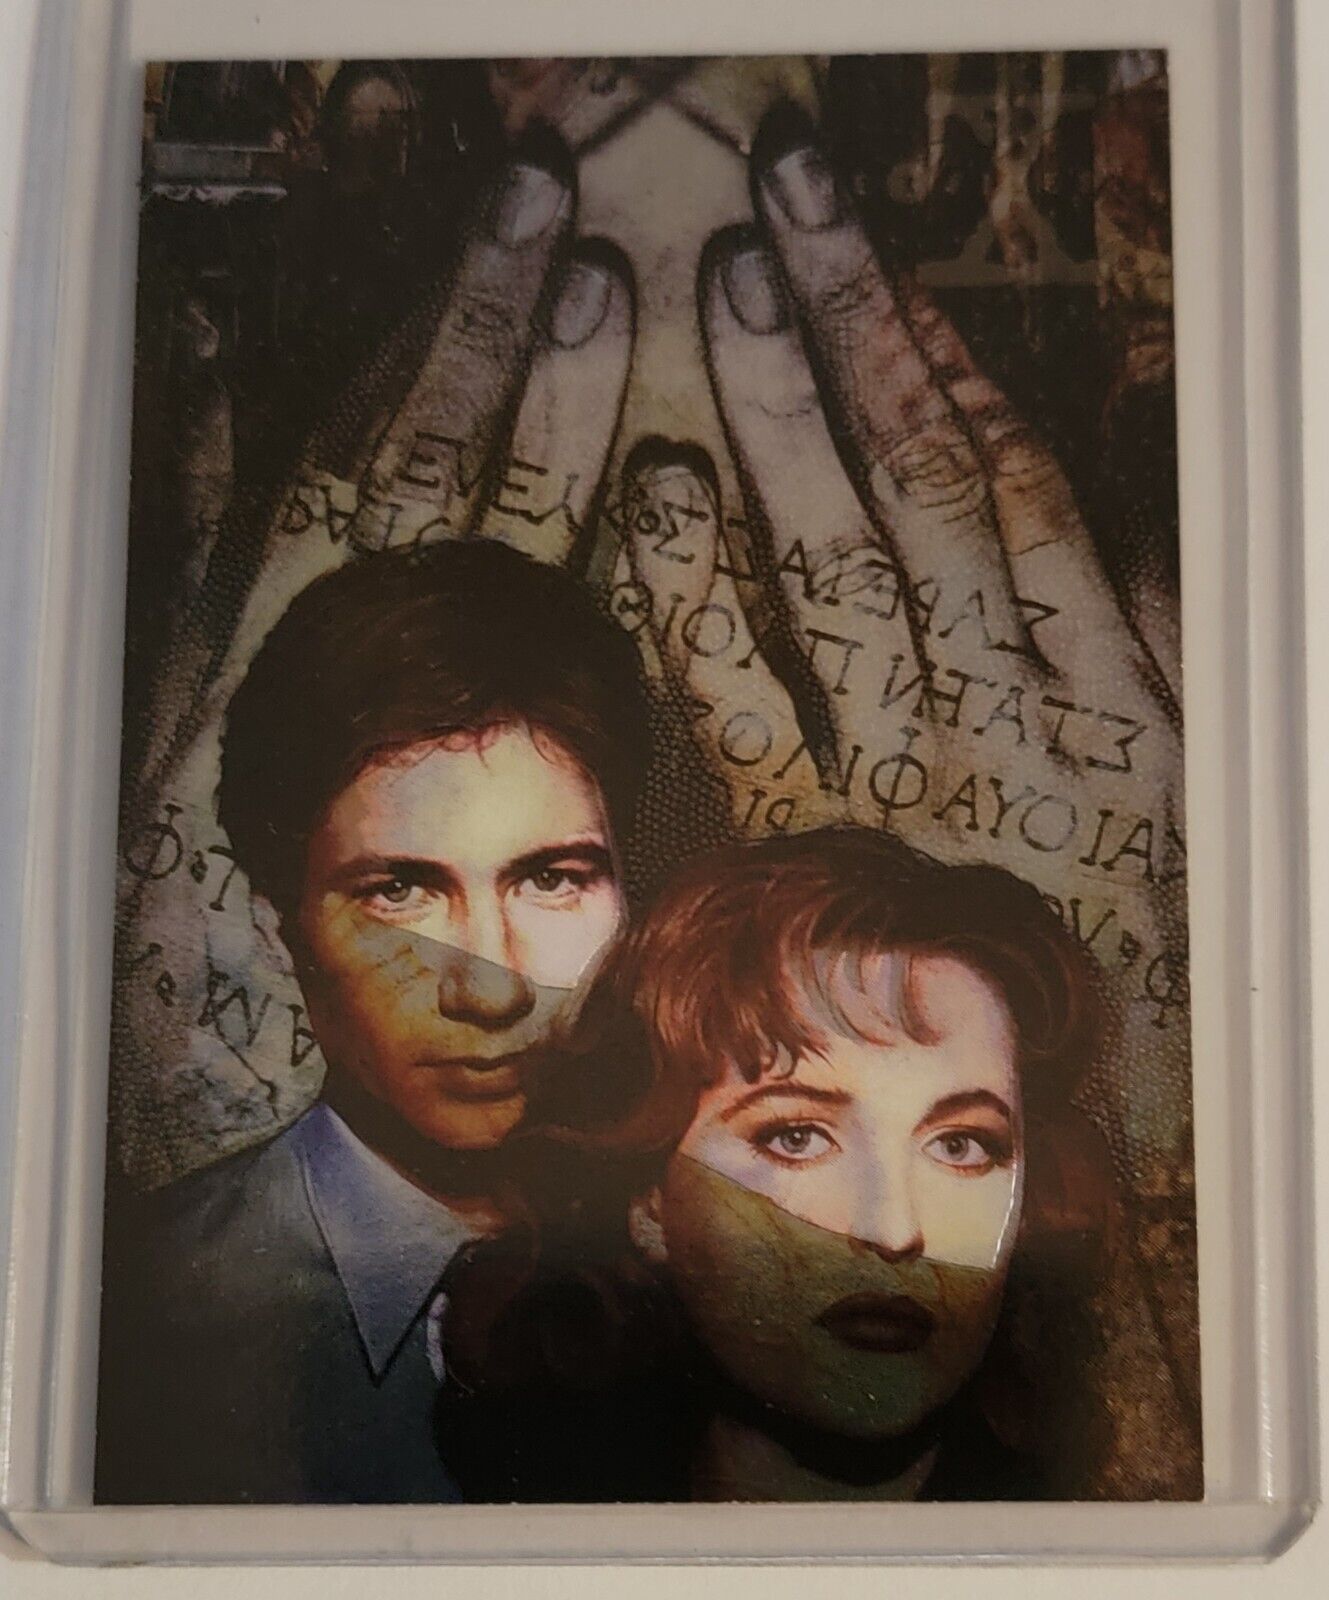 vintage X-Files Chase + Promo cards You Pick